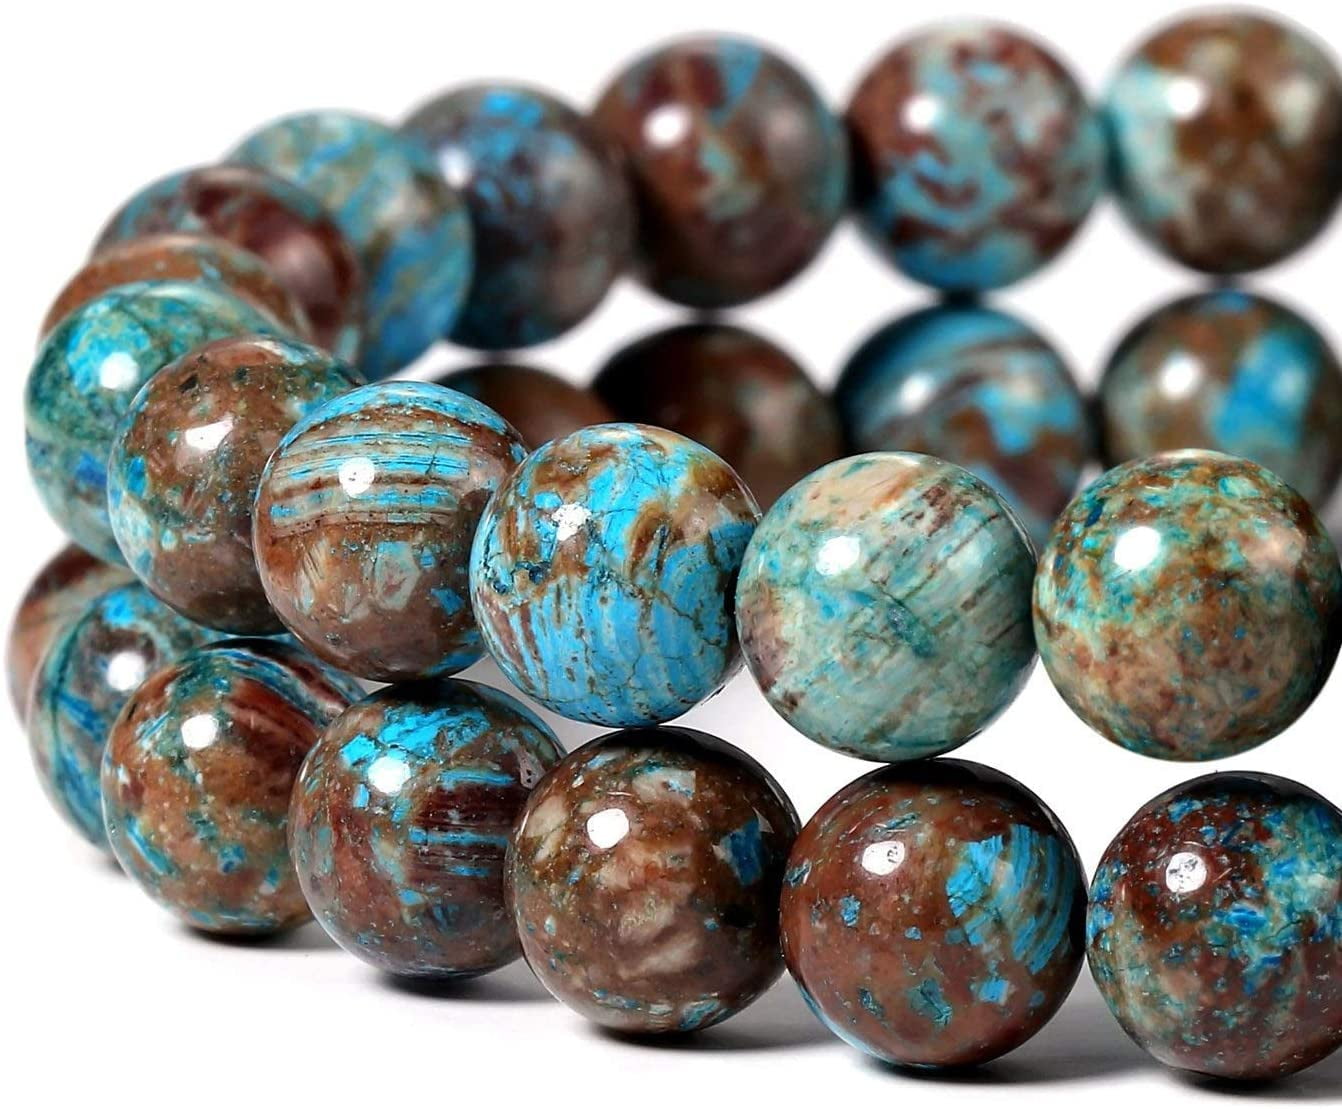 GEM-Inside 4mm Indian Agate Round Gemstone Semi Precious Loose Beads for Jewellery Making 15''